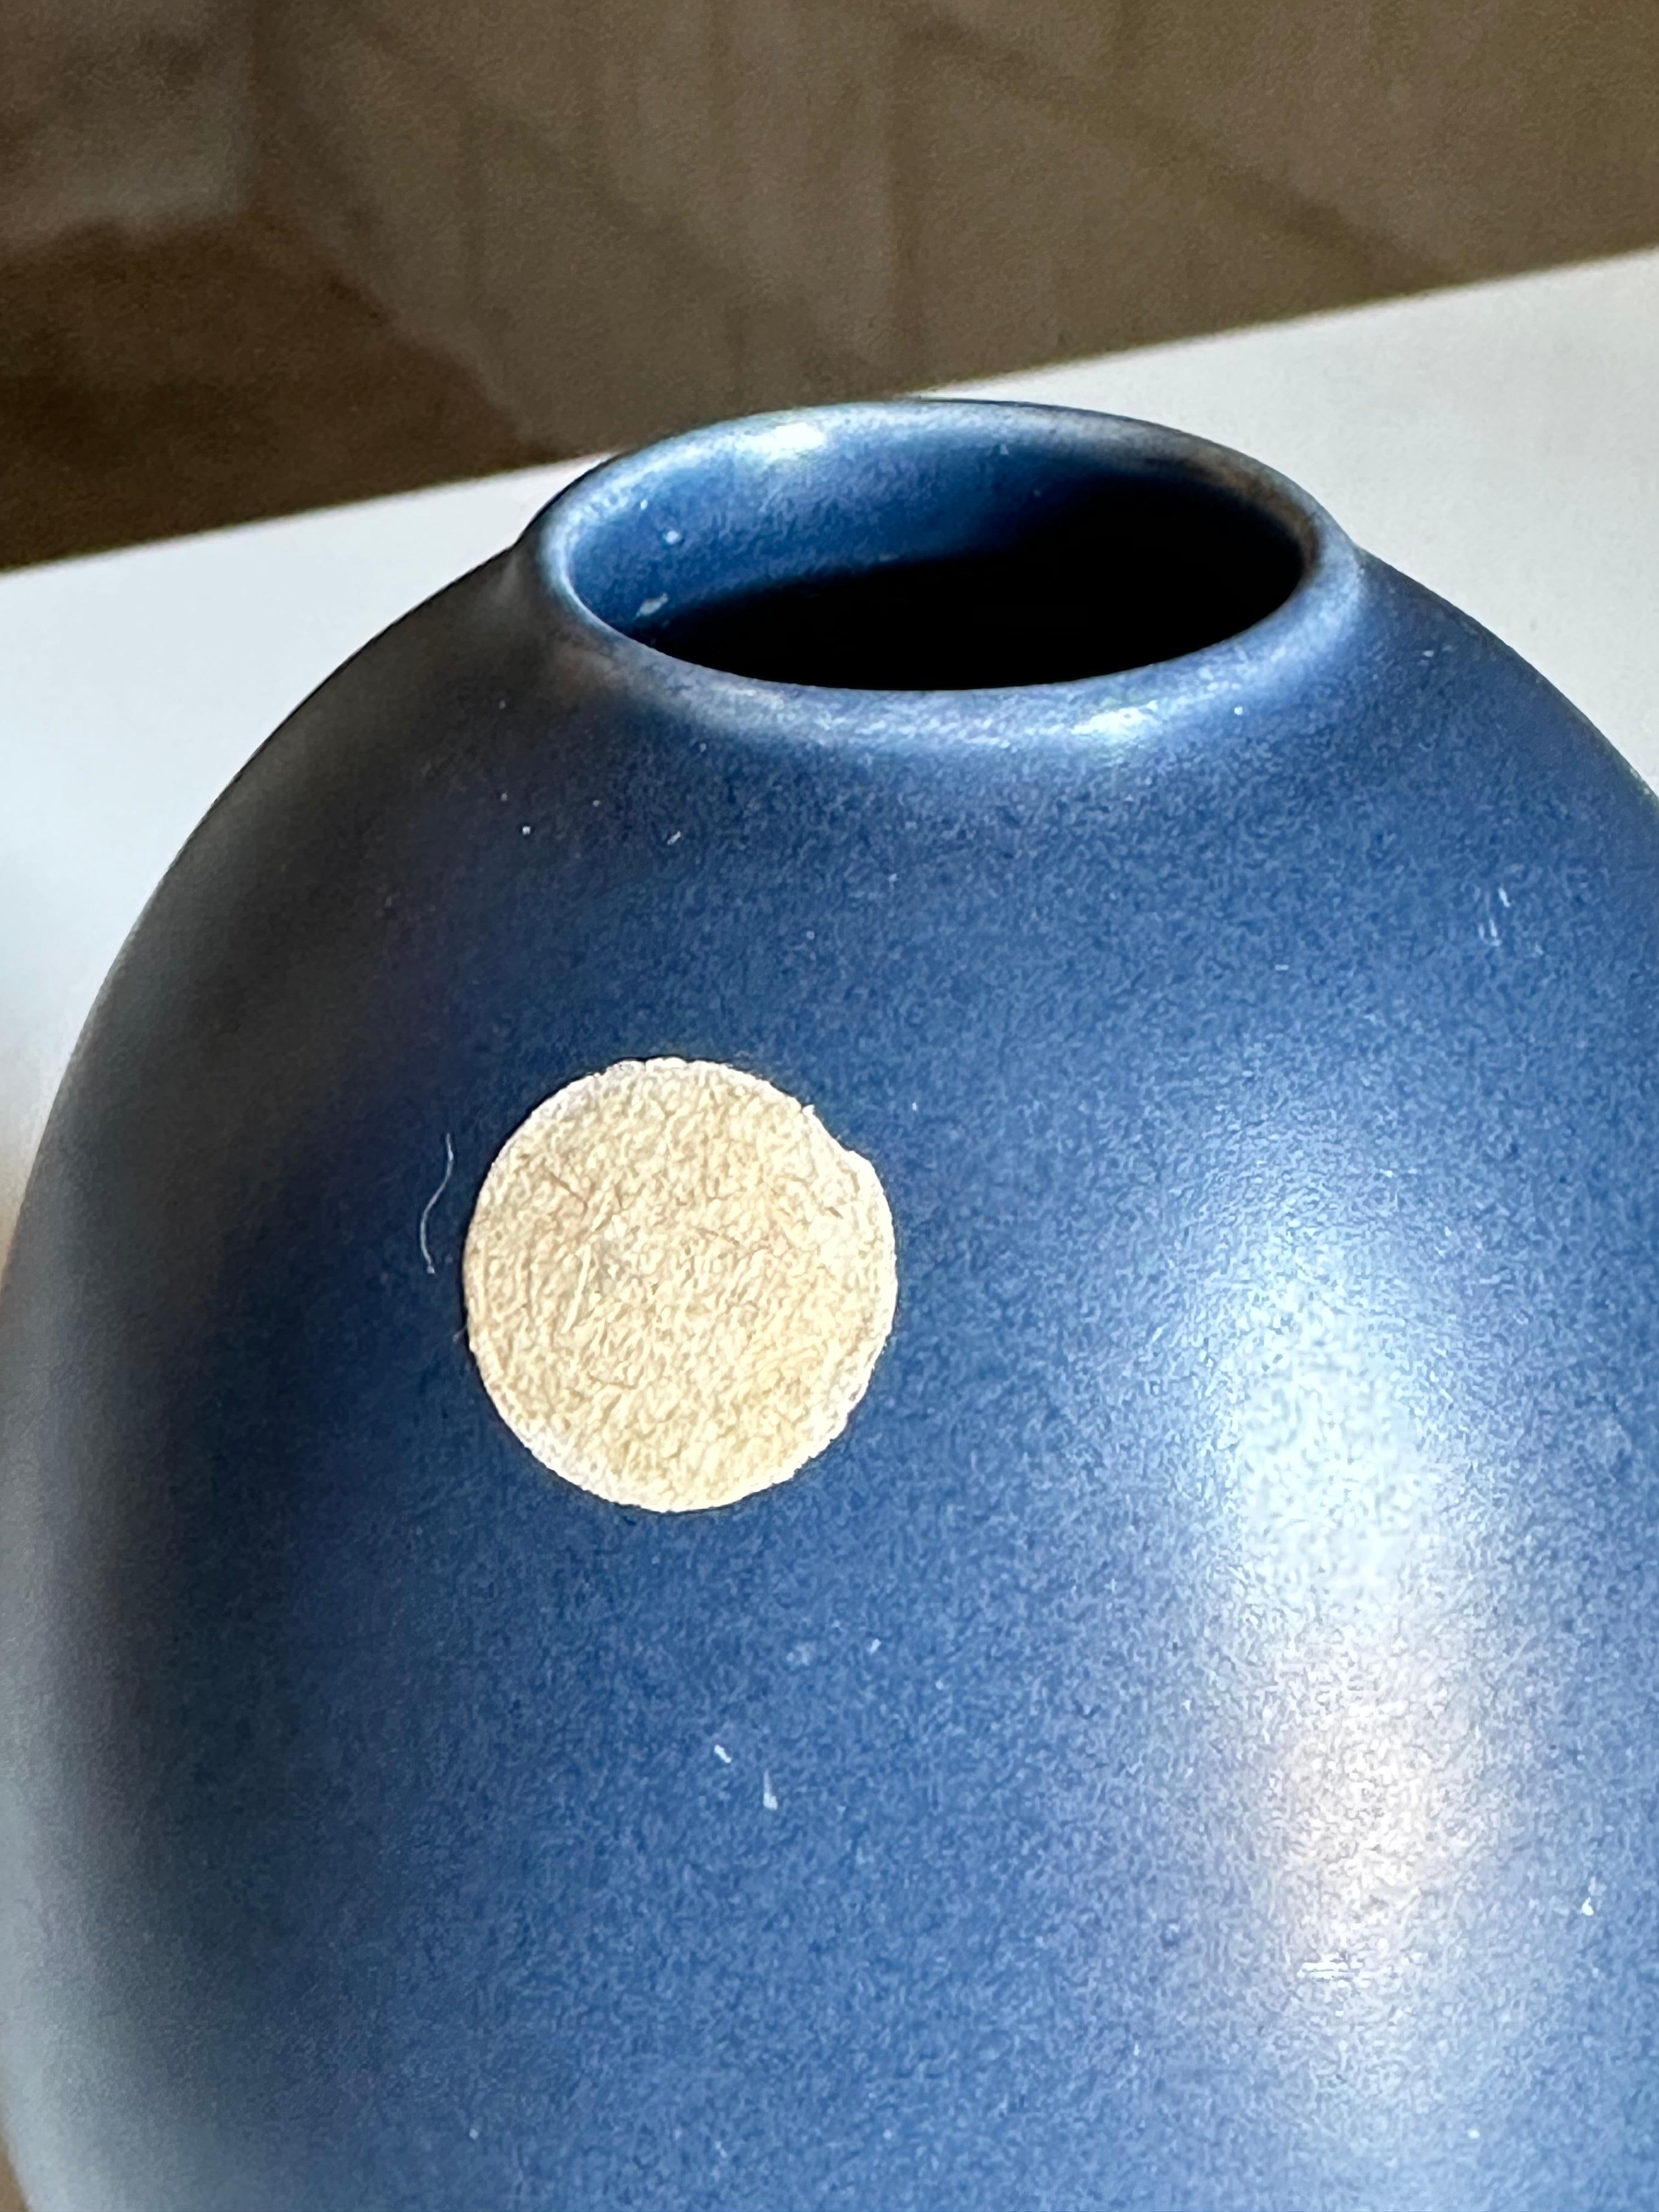 Wonderful vase in a vibrant blue manufactured by Bo Fajans. Great bulbous rounded form and striking color. This vase retains its original sticker on the outside, albeit now faded. Vase is also signed on bottom. 